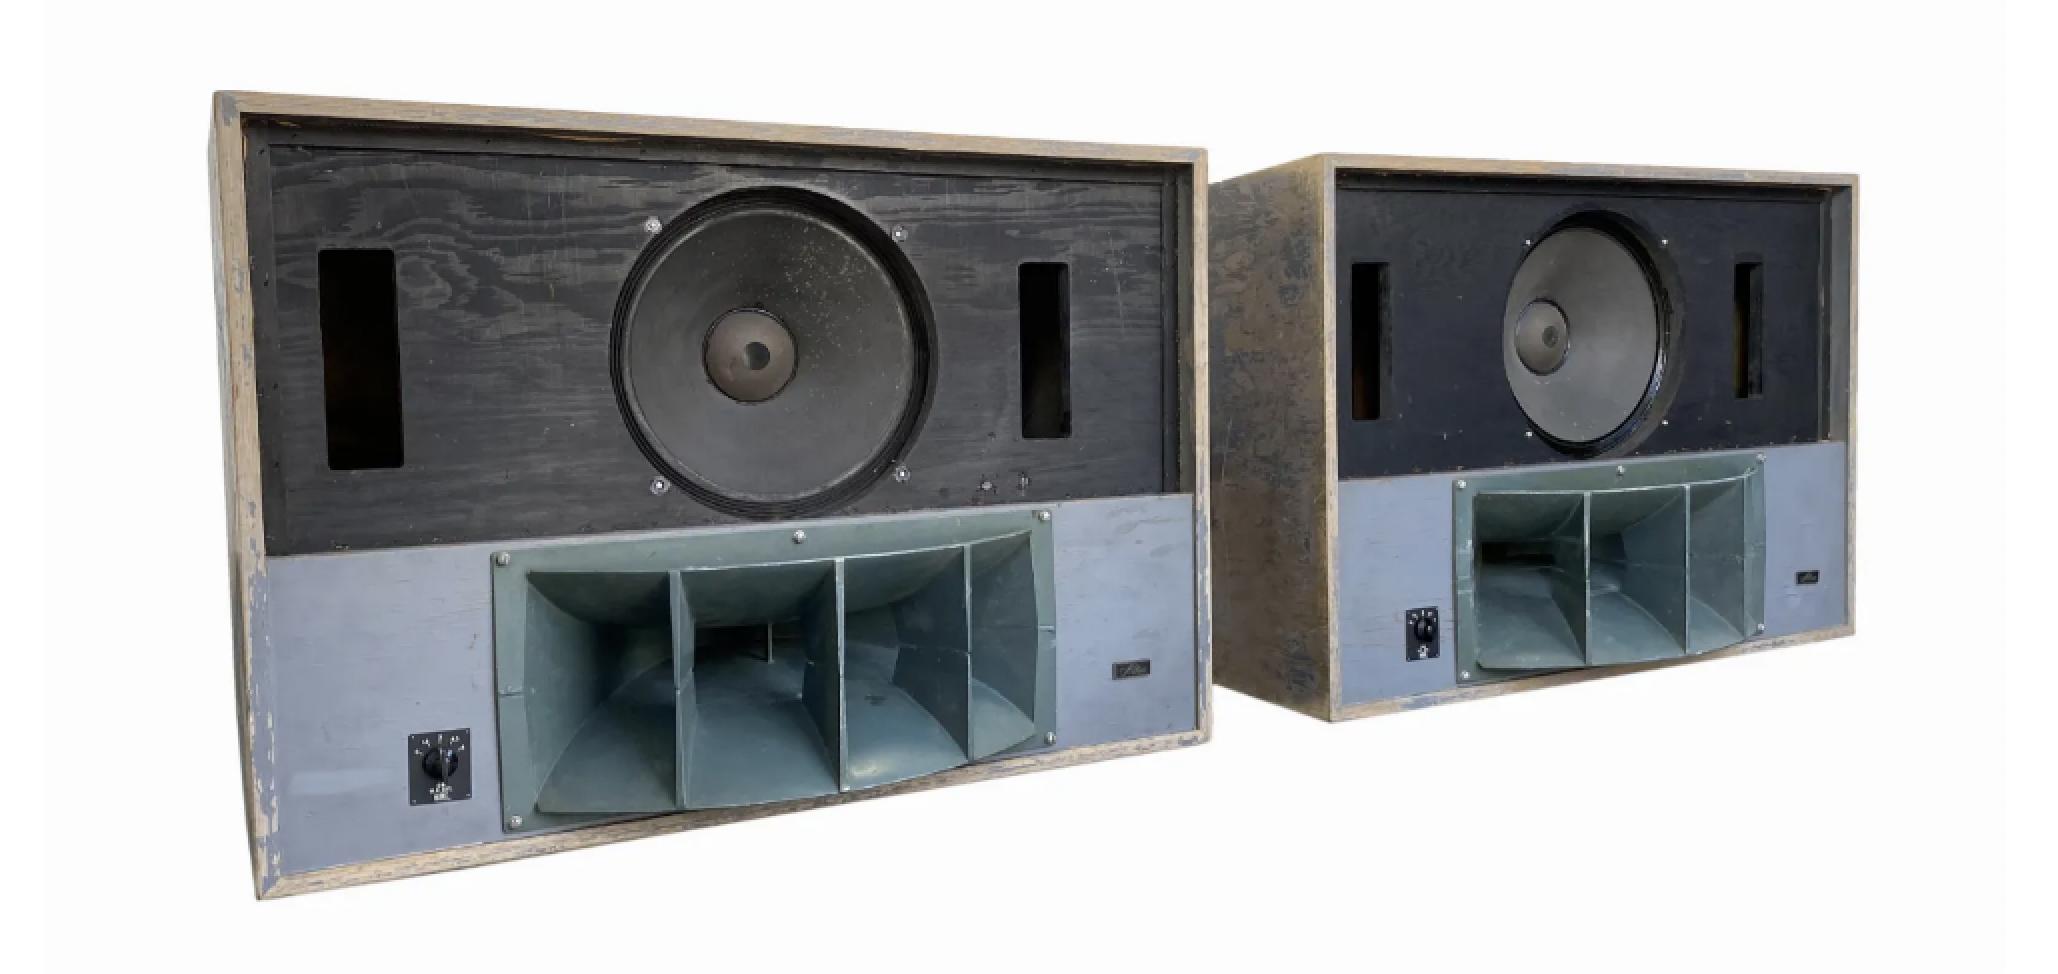 Massive pair of speakers installed at Jimi Hendrix’s Electric Lady West studio, est. $30,000-$400,000